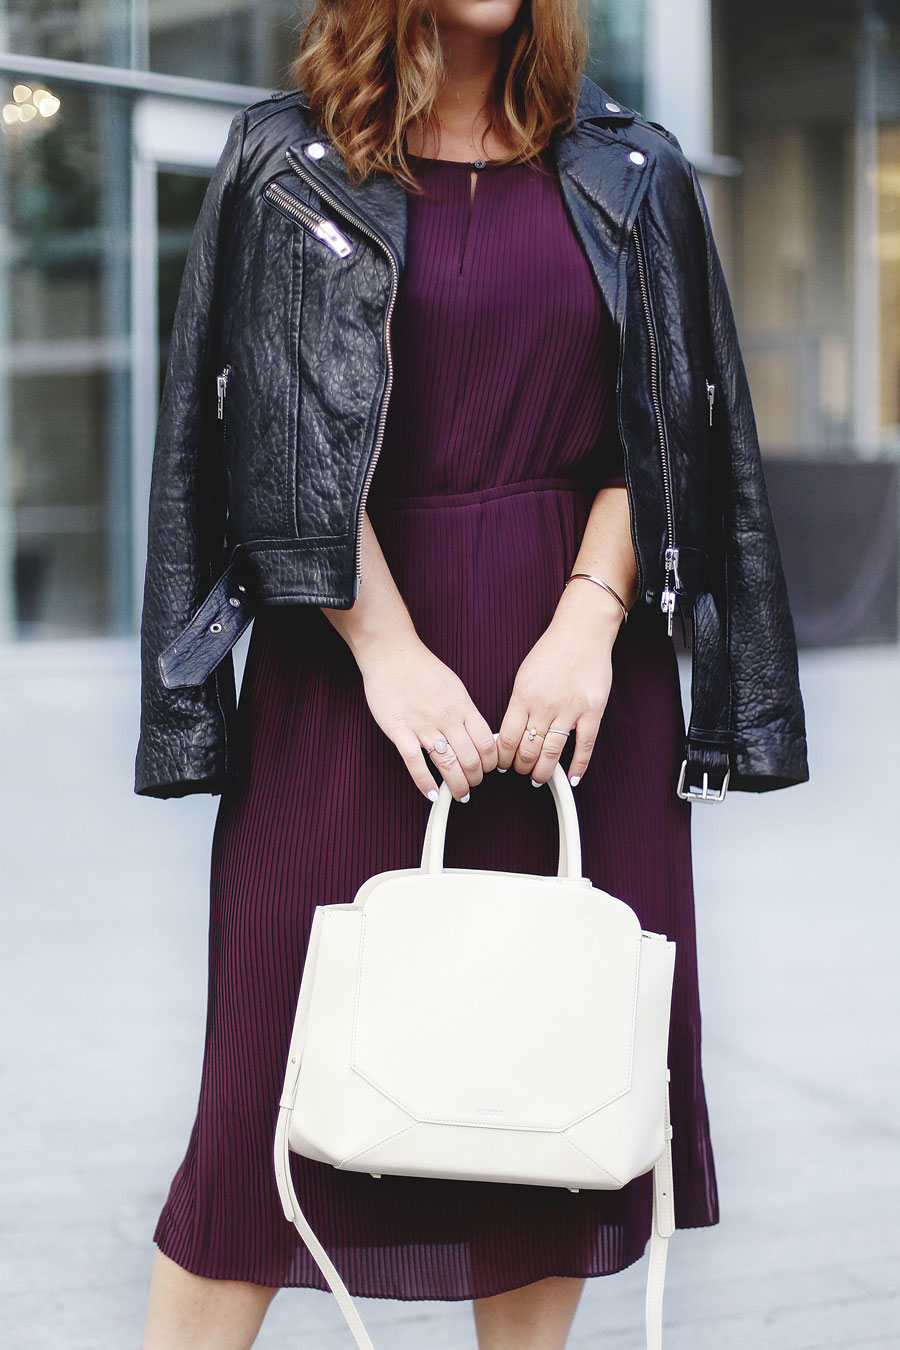 To Vogue or Bust shares details about the Aritzia warehouse sale 2016 in a Wilfred silk pleated dress, Mackage Rumer leather jacket, Aritzia Auxiliary Bega bag and black pumps.